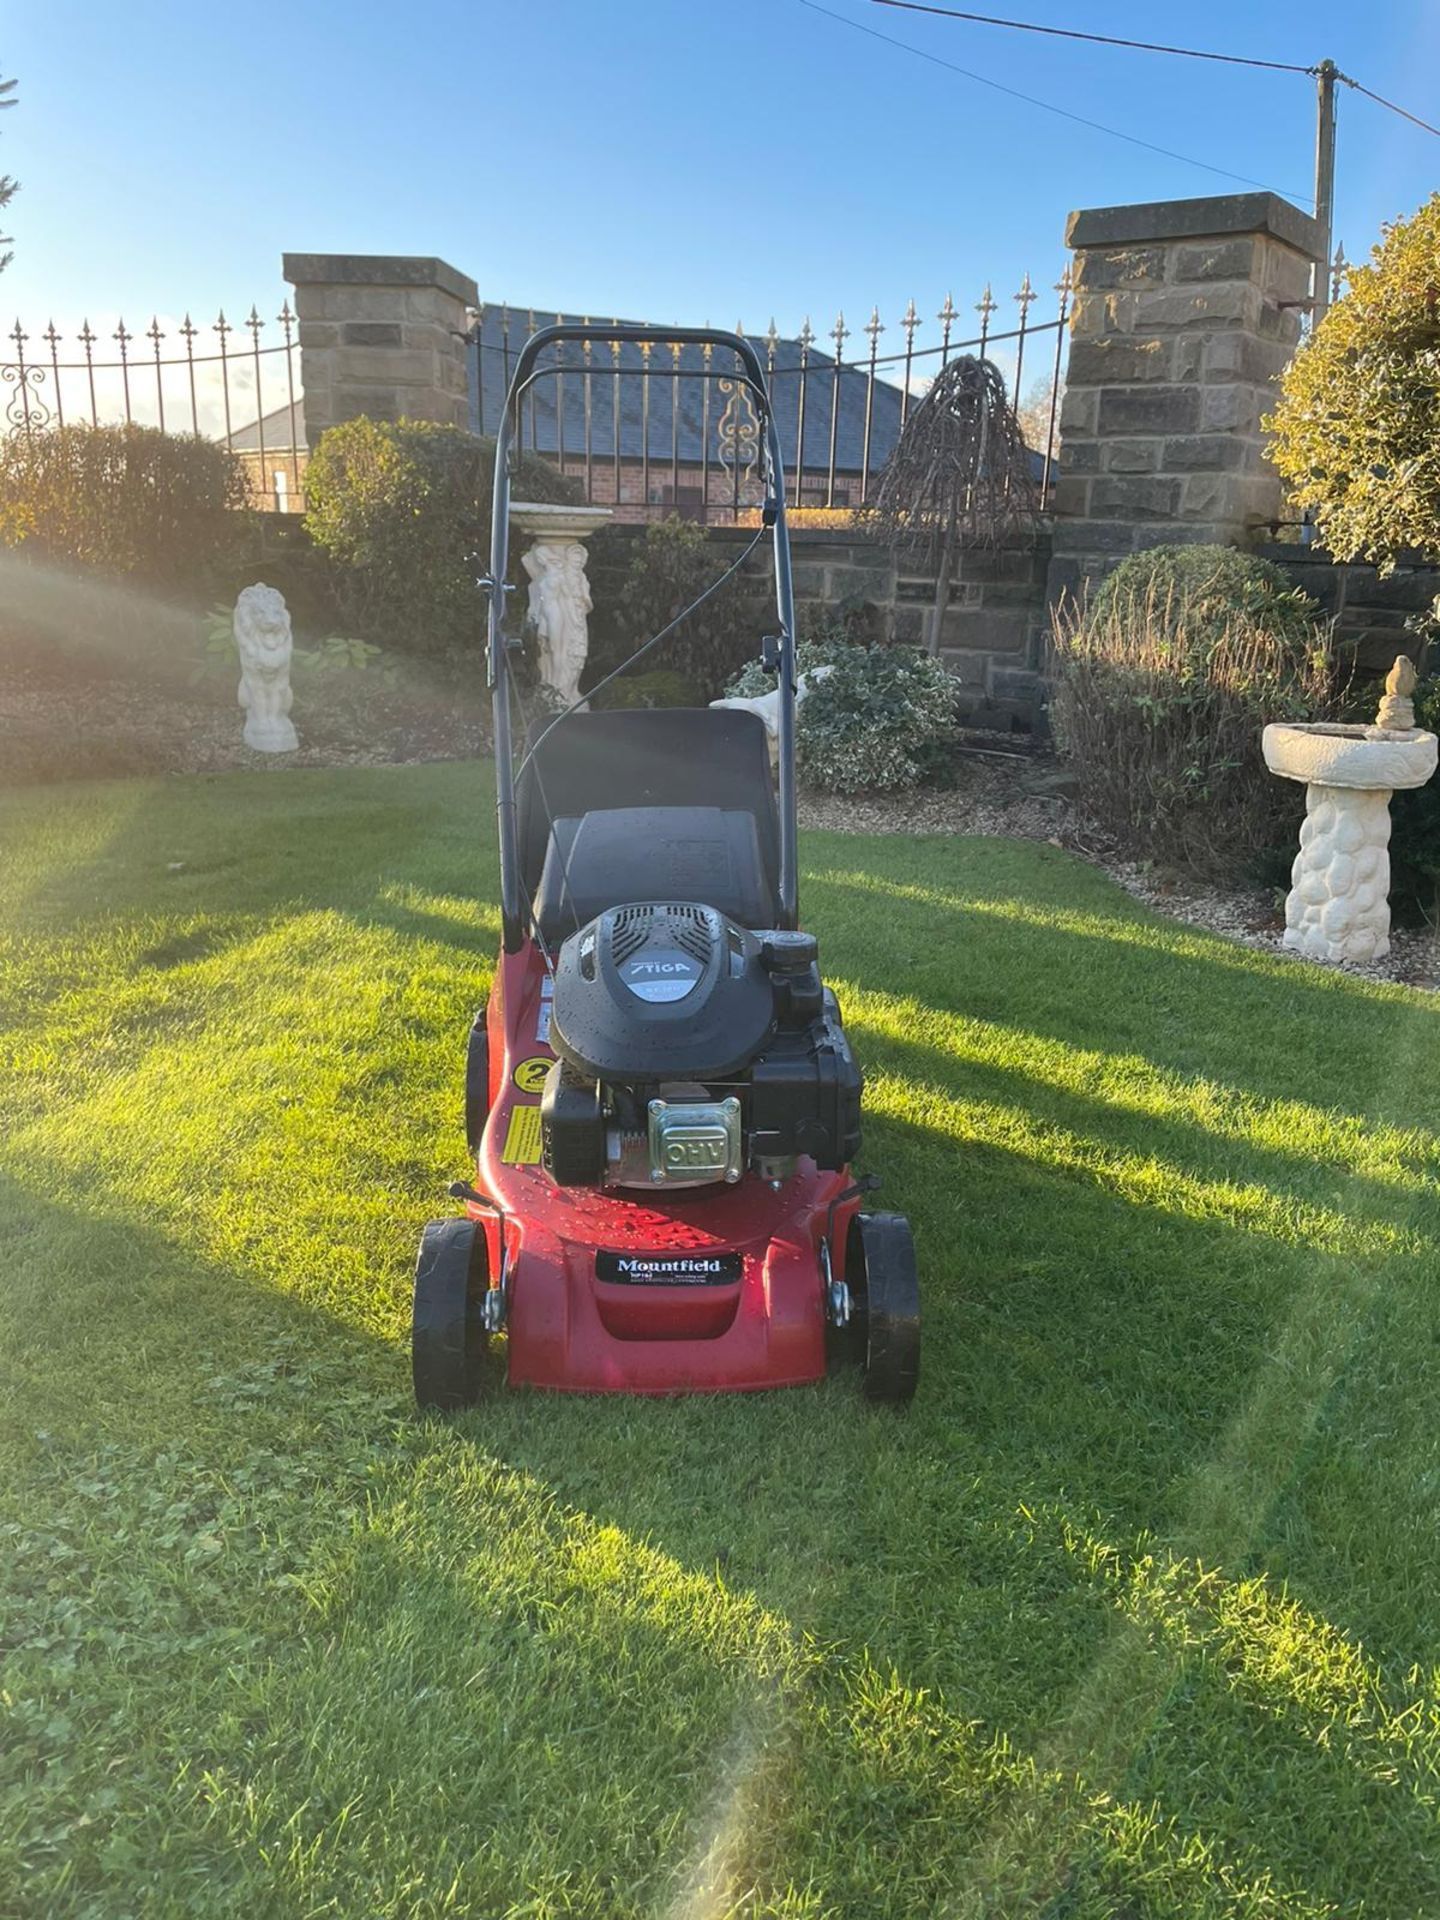 NEW AND UNUSED 2021 MOUNTFIELD EP 414 PUSH LAWN MOWER, FULLY ASSEMBLED *NO VAT* - Image 3 of 5